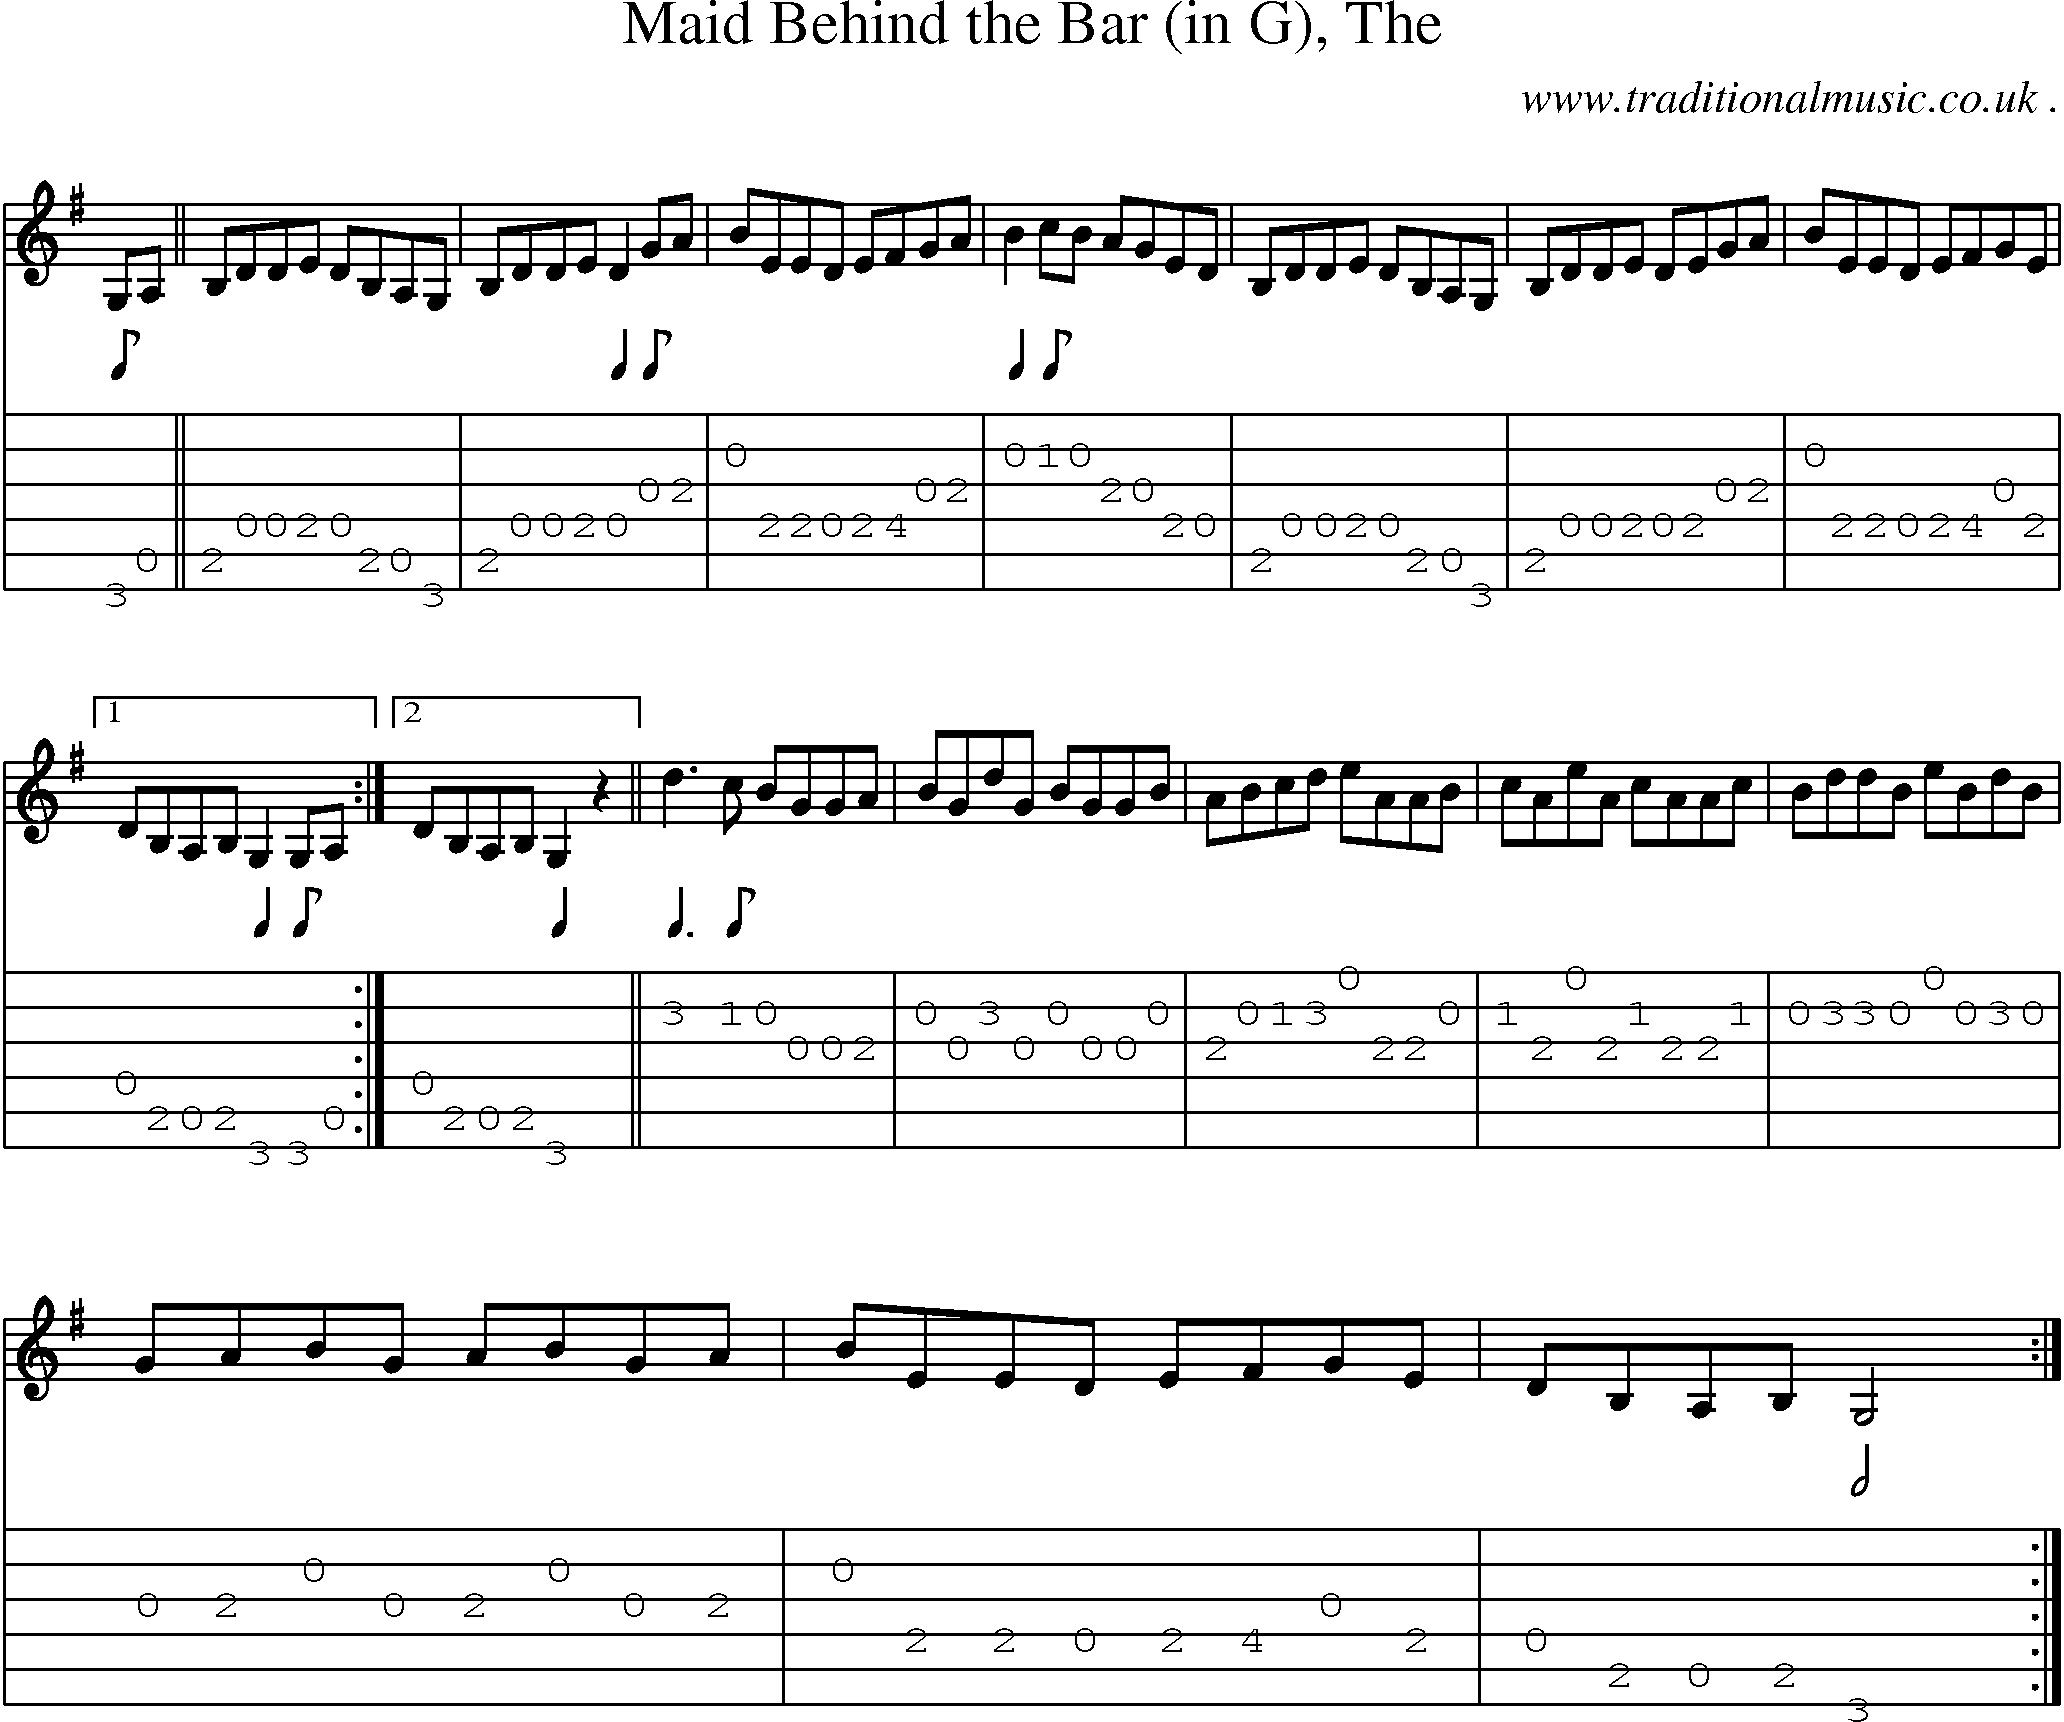 Sheet-music  score, Chords and Guitar Tabs for Maid Behind The Bar In G The